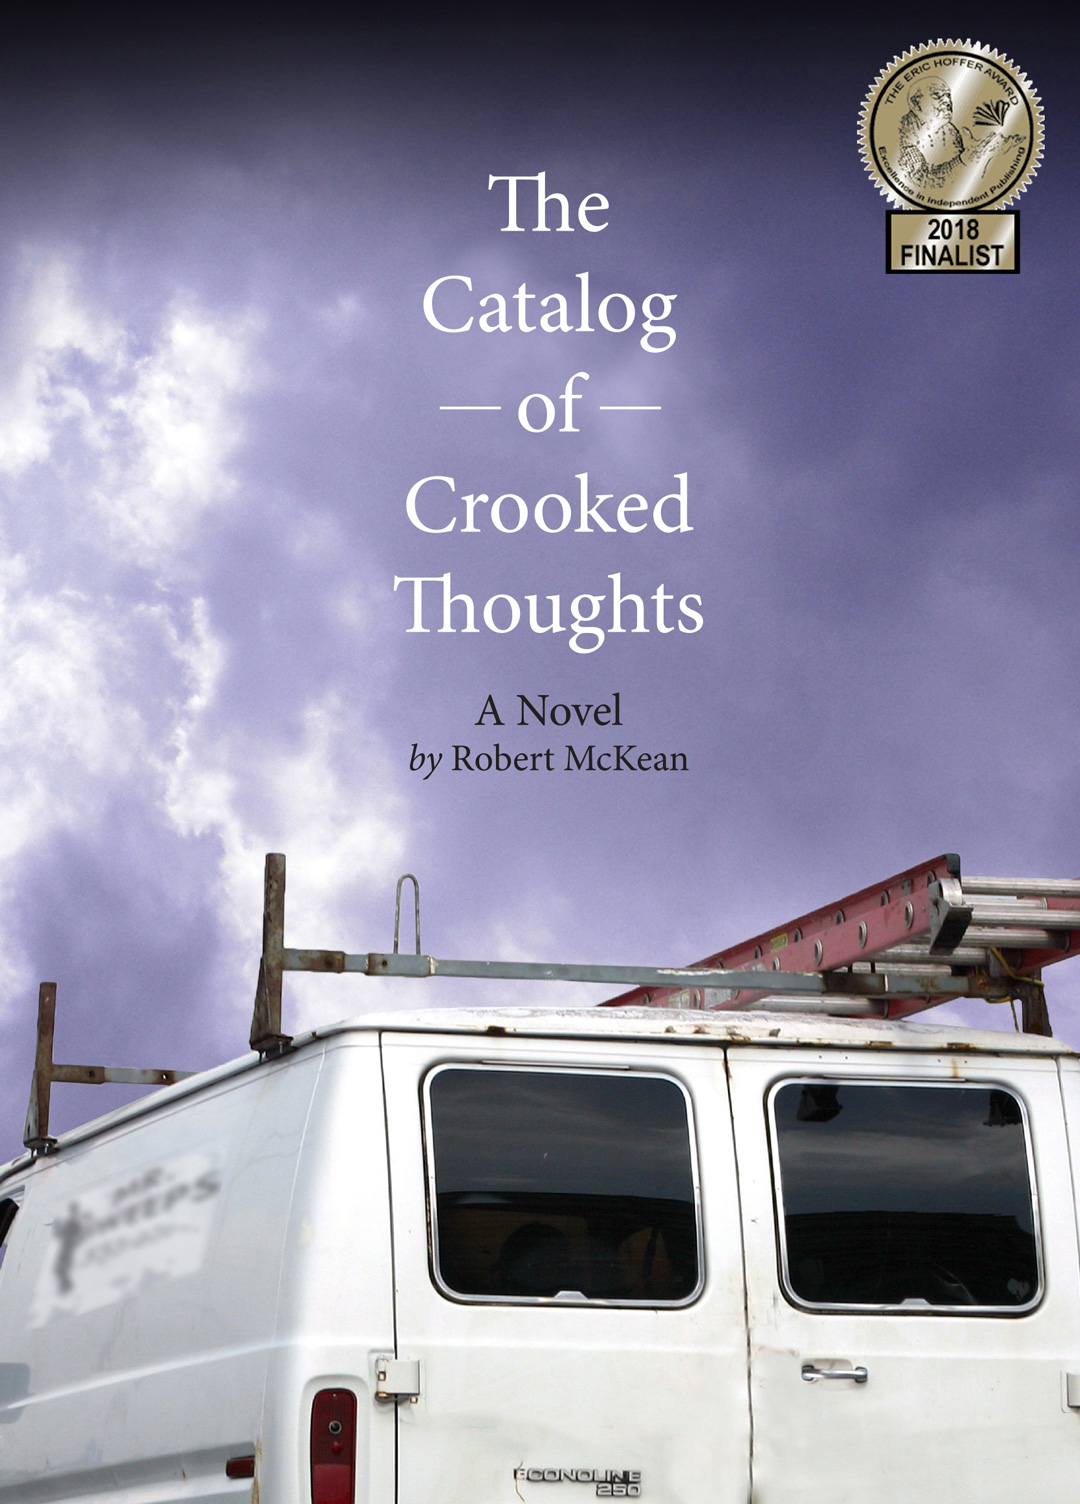 The Catalog of Crooked Thoughts book cover